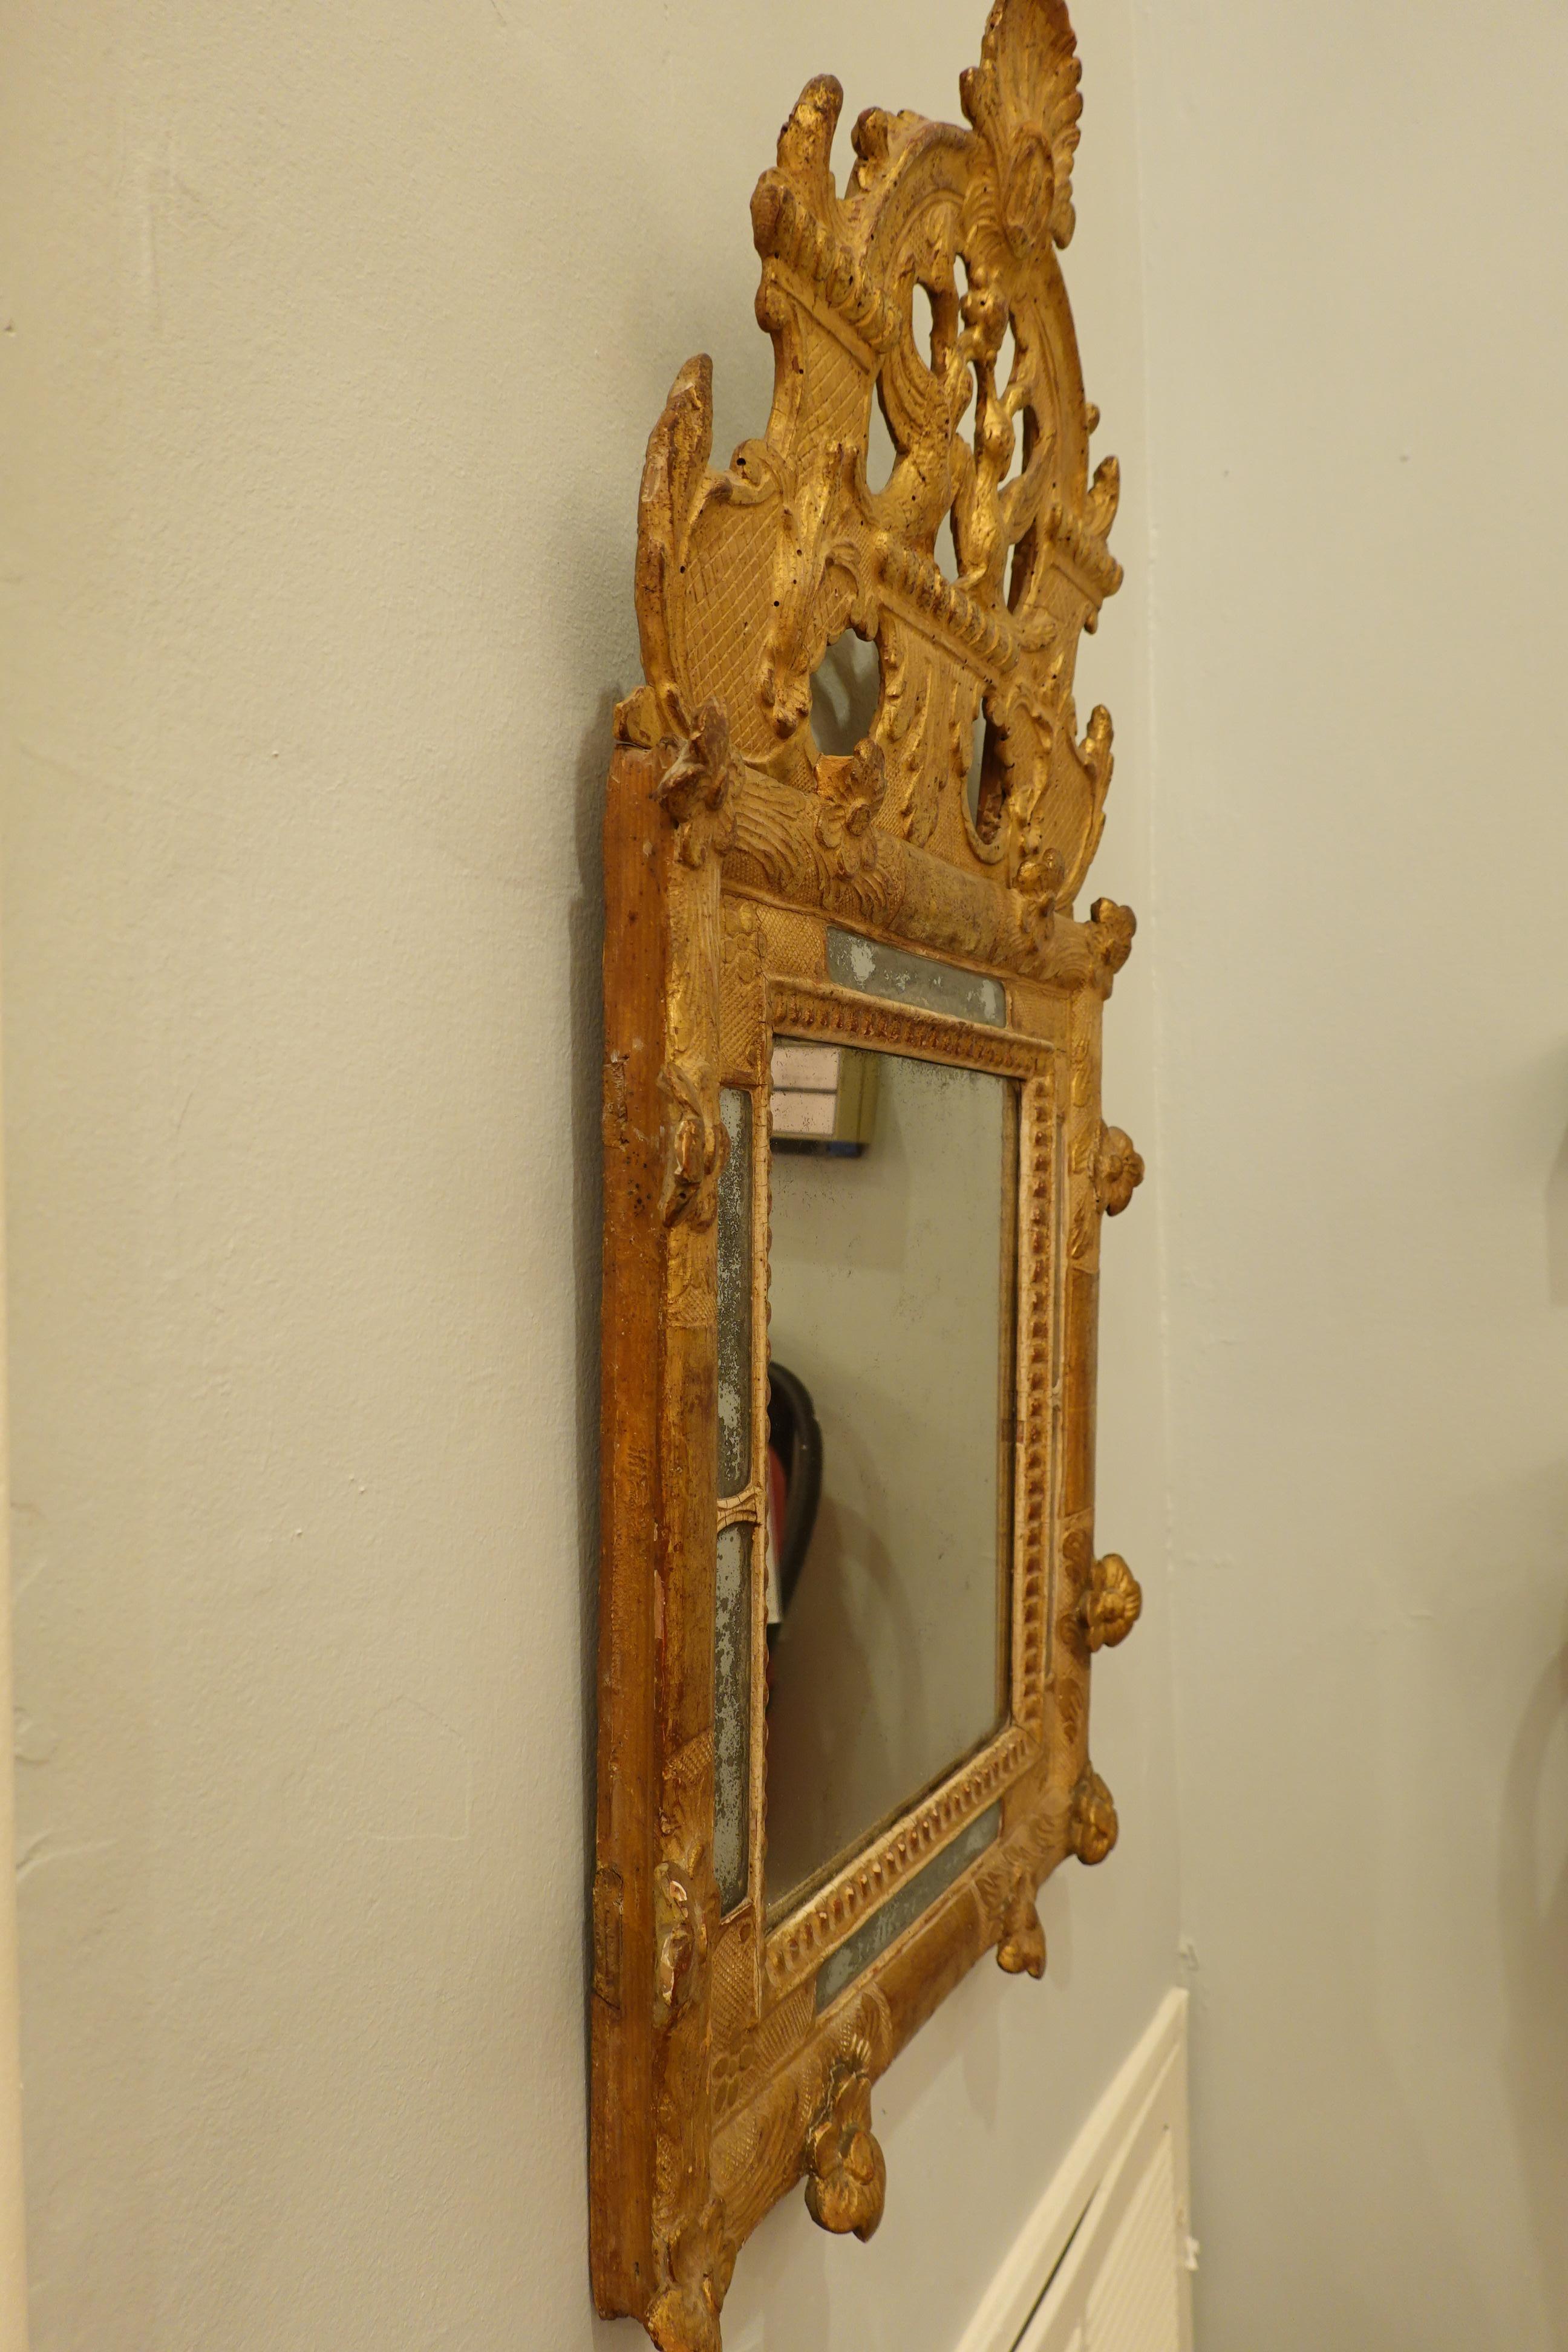 French Regence Period Giltwood Mirror with Birds, Scallop Shell and Flowers For Sale 7